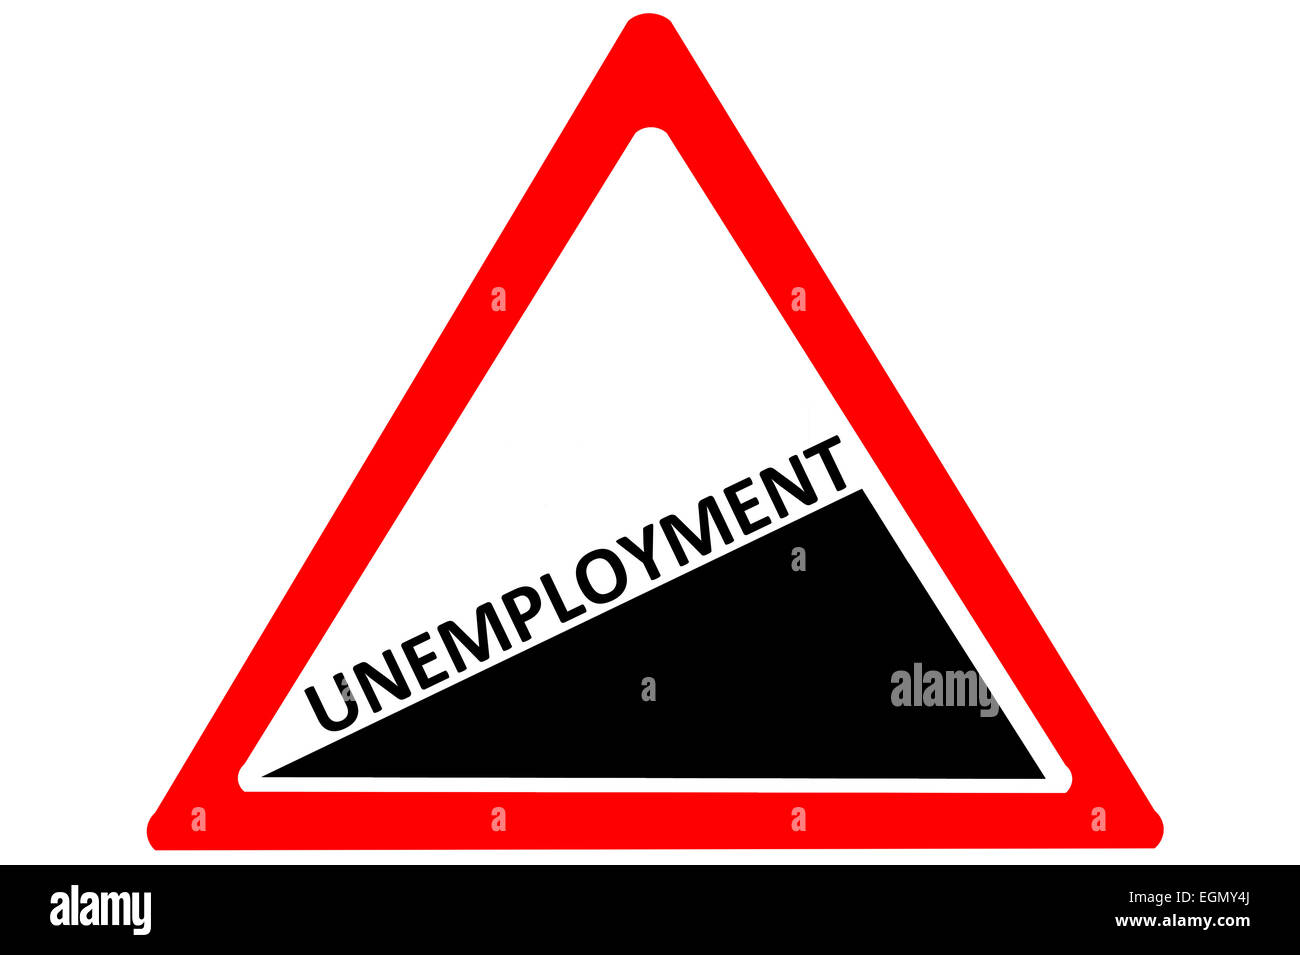 Unemployment increasing warning road sign isolated on white background Stock Photo